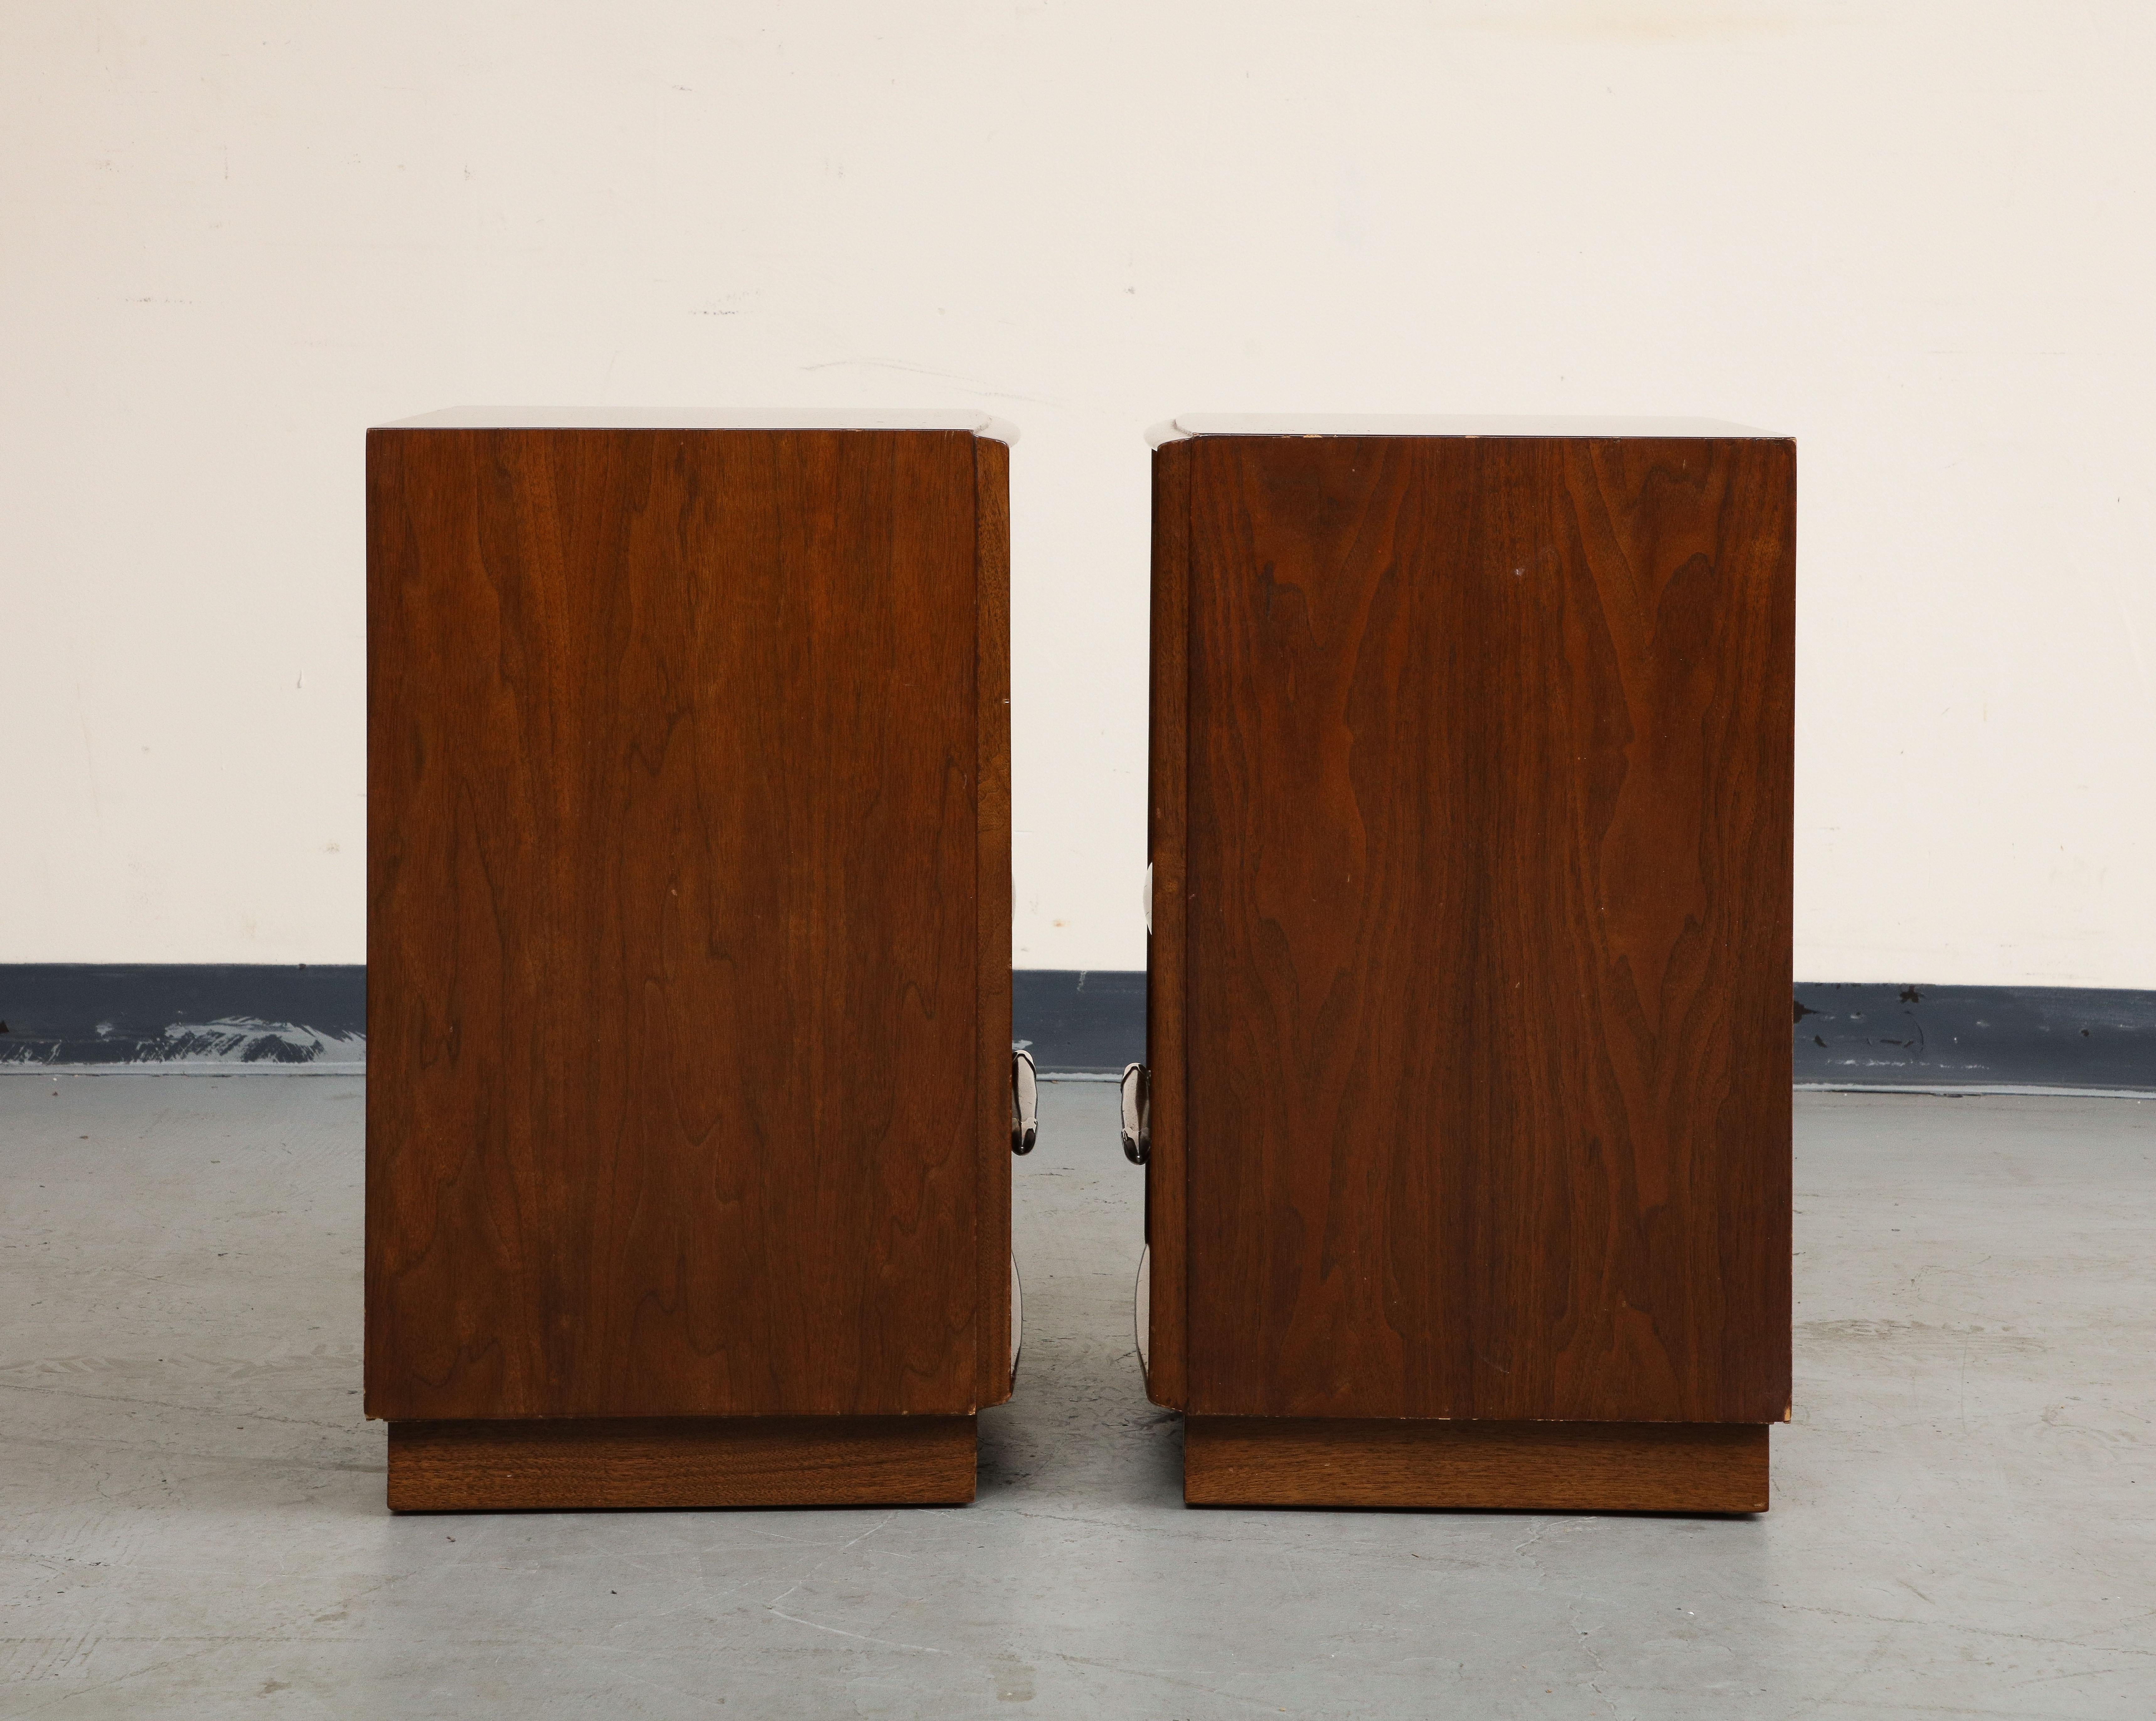 Pair of 1950s Walnut Nightstands or End Tables, Robsjohn-Gibbings for Widdicomb For Sale 1